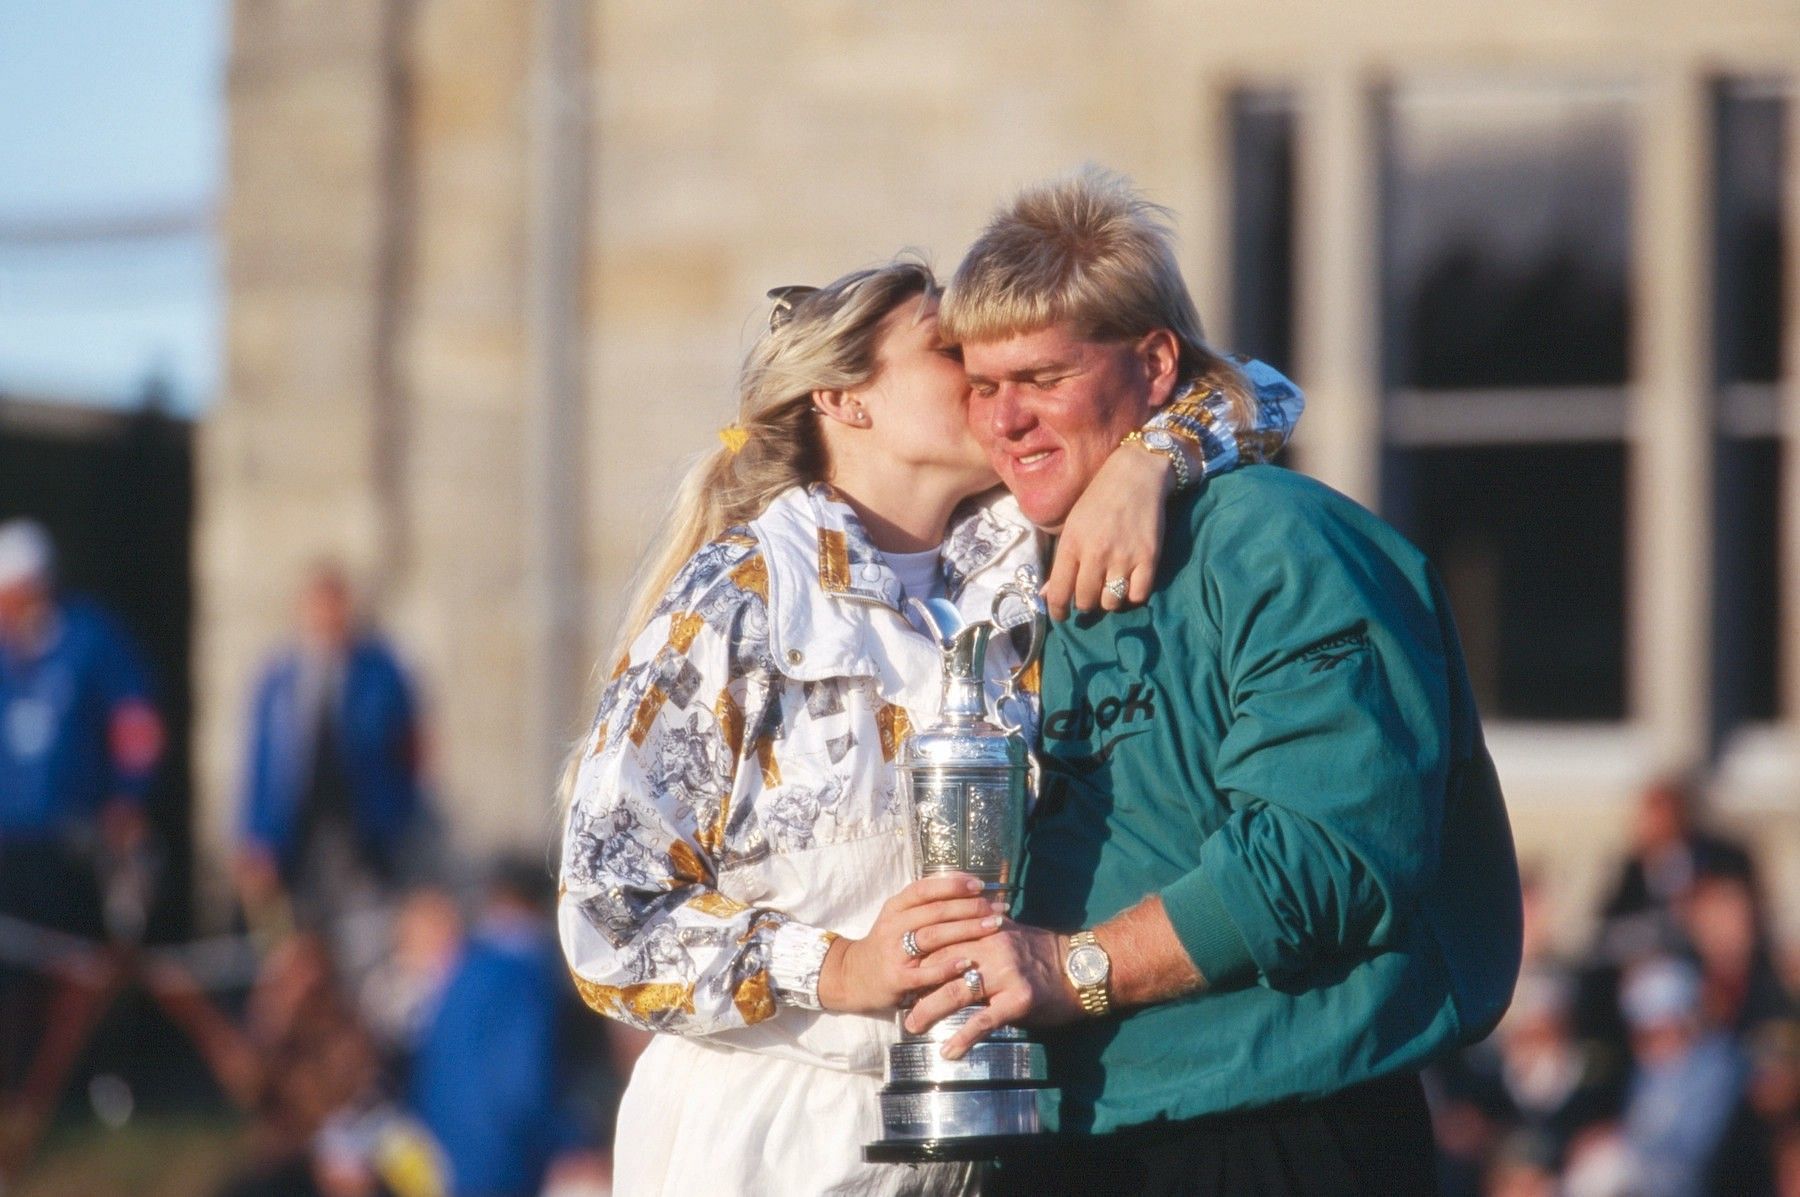 John Daly with wife ( image credit: getty)